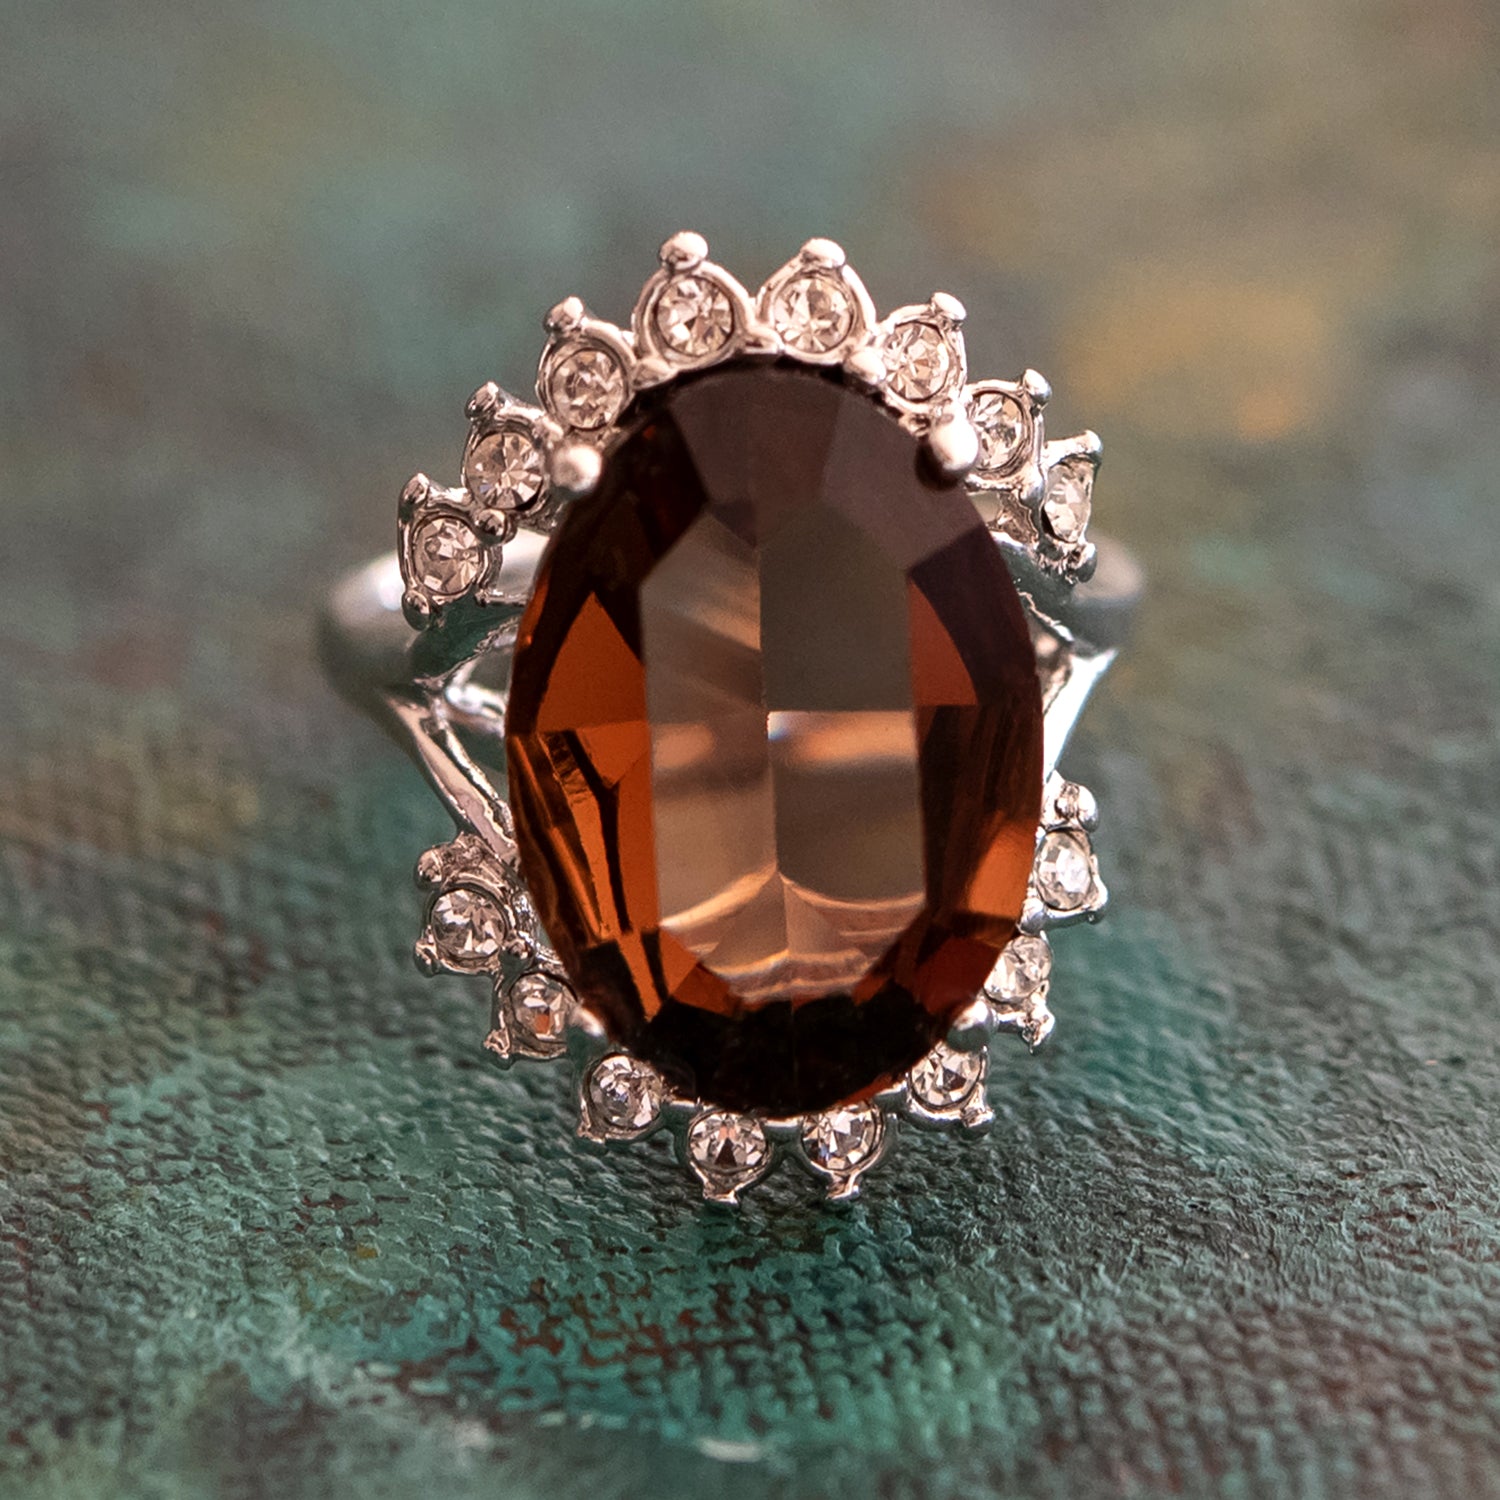 Vintage 1970's Ring Smokey Topaz and Clear Austrian Crystals 18k White Gold Plated Made in USA